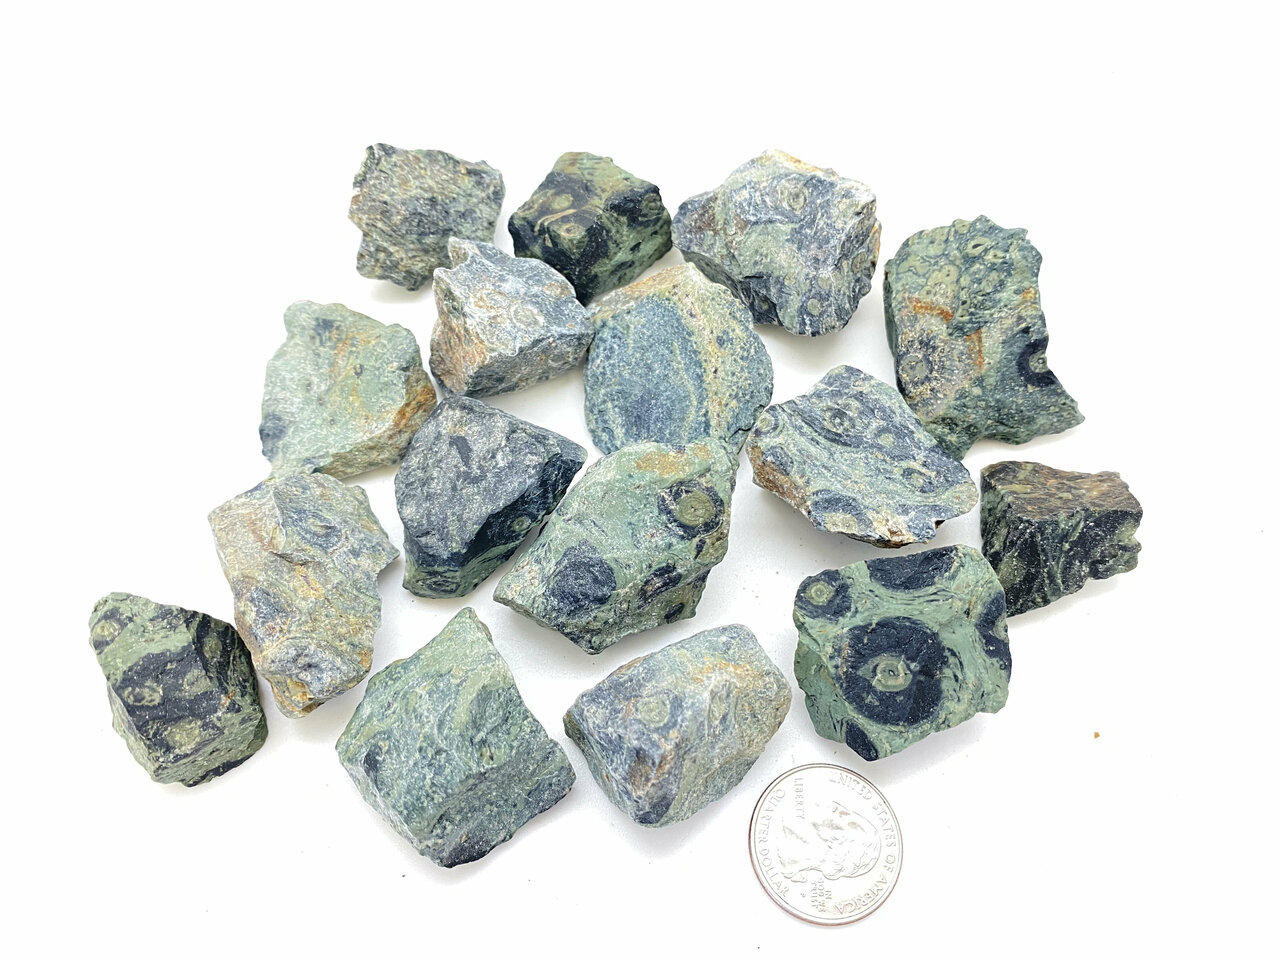 1/2 lb of Tumbled Fancy Jasper Natural Rock Chips with Info Card